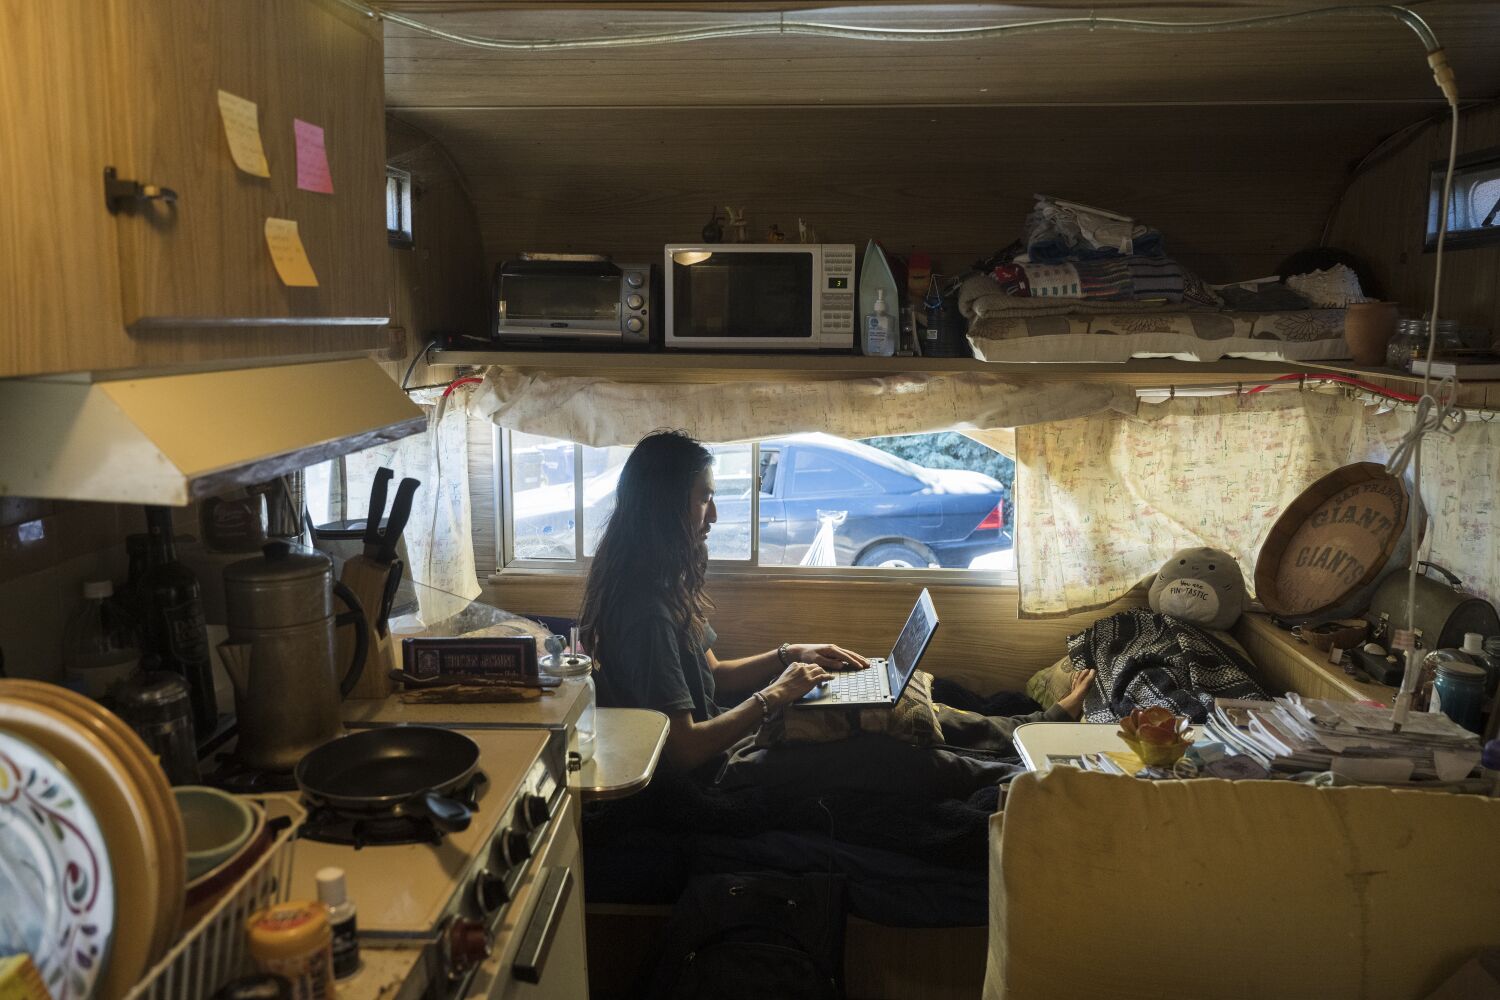 As California student housing crisis deepens, solutions face roadblocks at UC and elsewhere